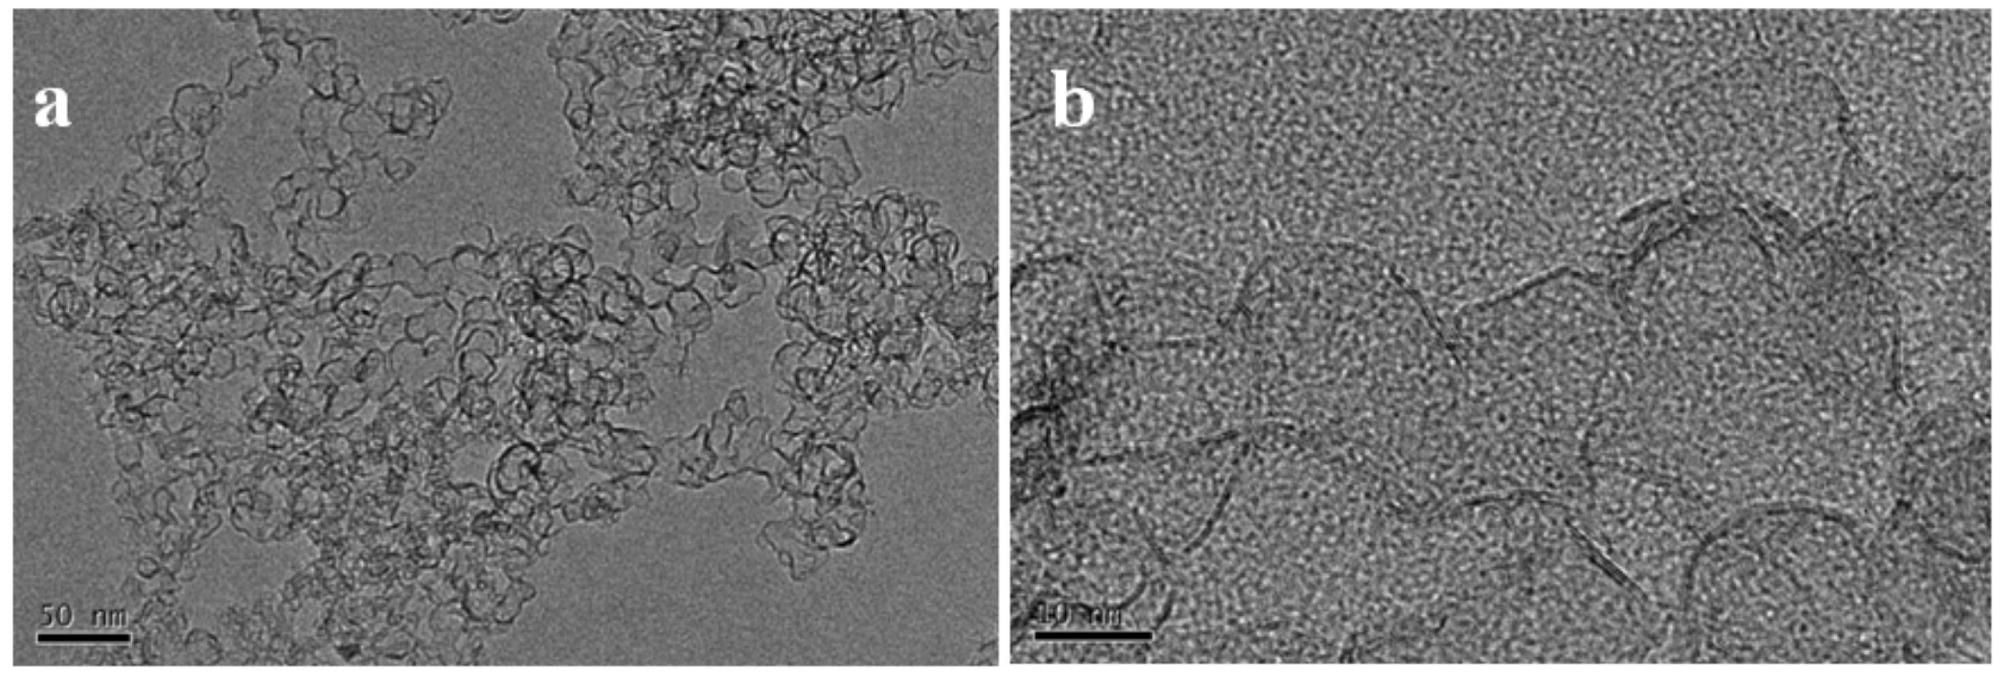 TEM images of the connective 3D graphene hollow cages obtained from the sample prepared at the FB–CVD temperature of 1300 °C under pure Ar atmosphere (sample S4). (a) Low magnification, (b) High magnification.